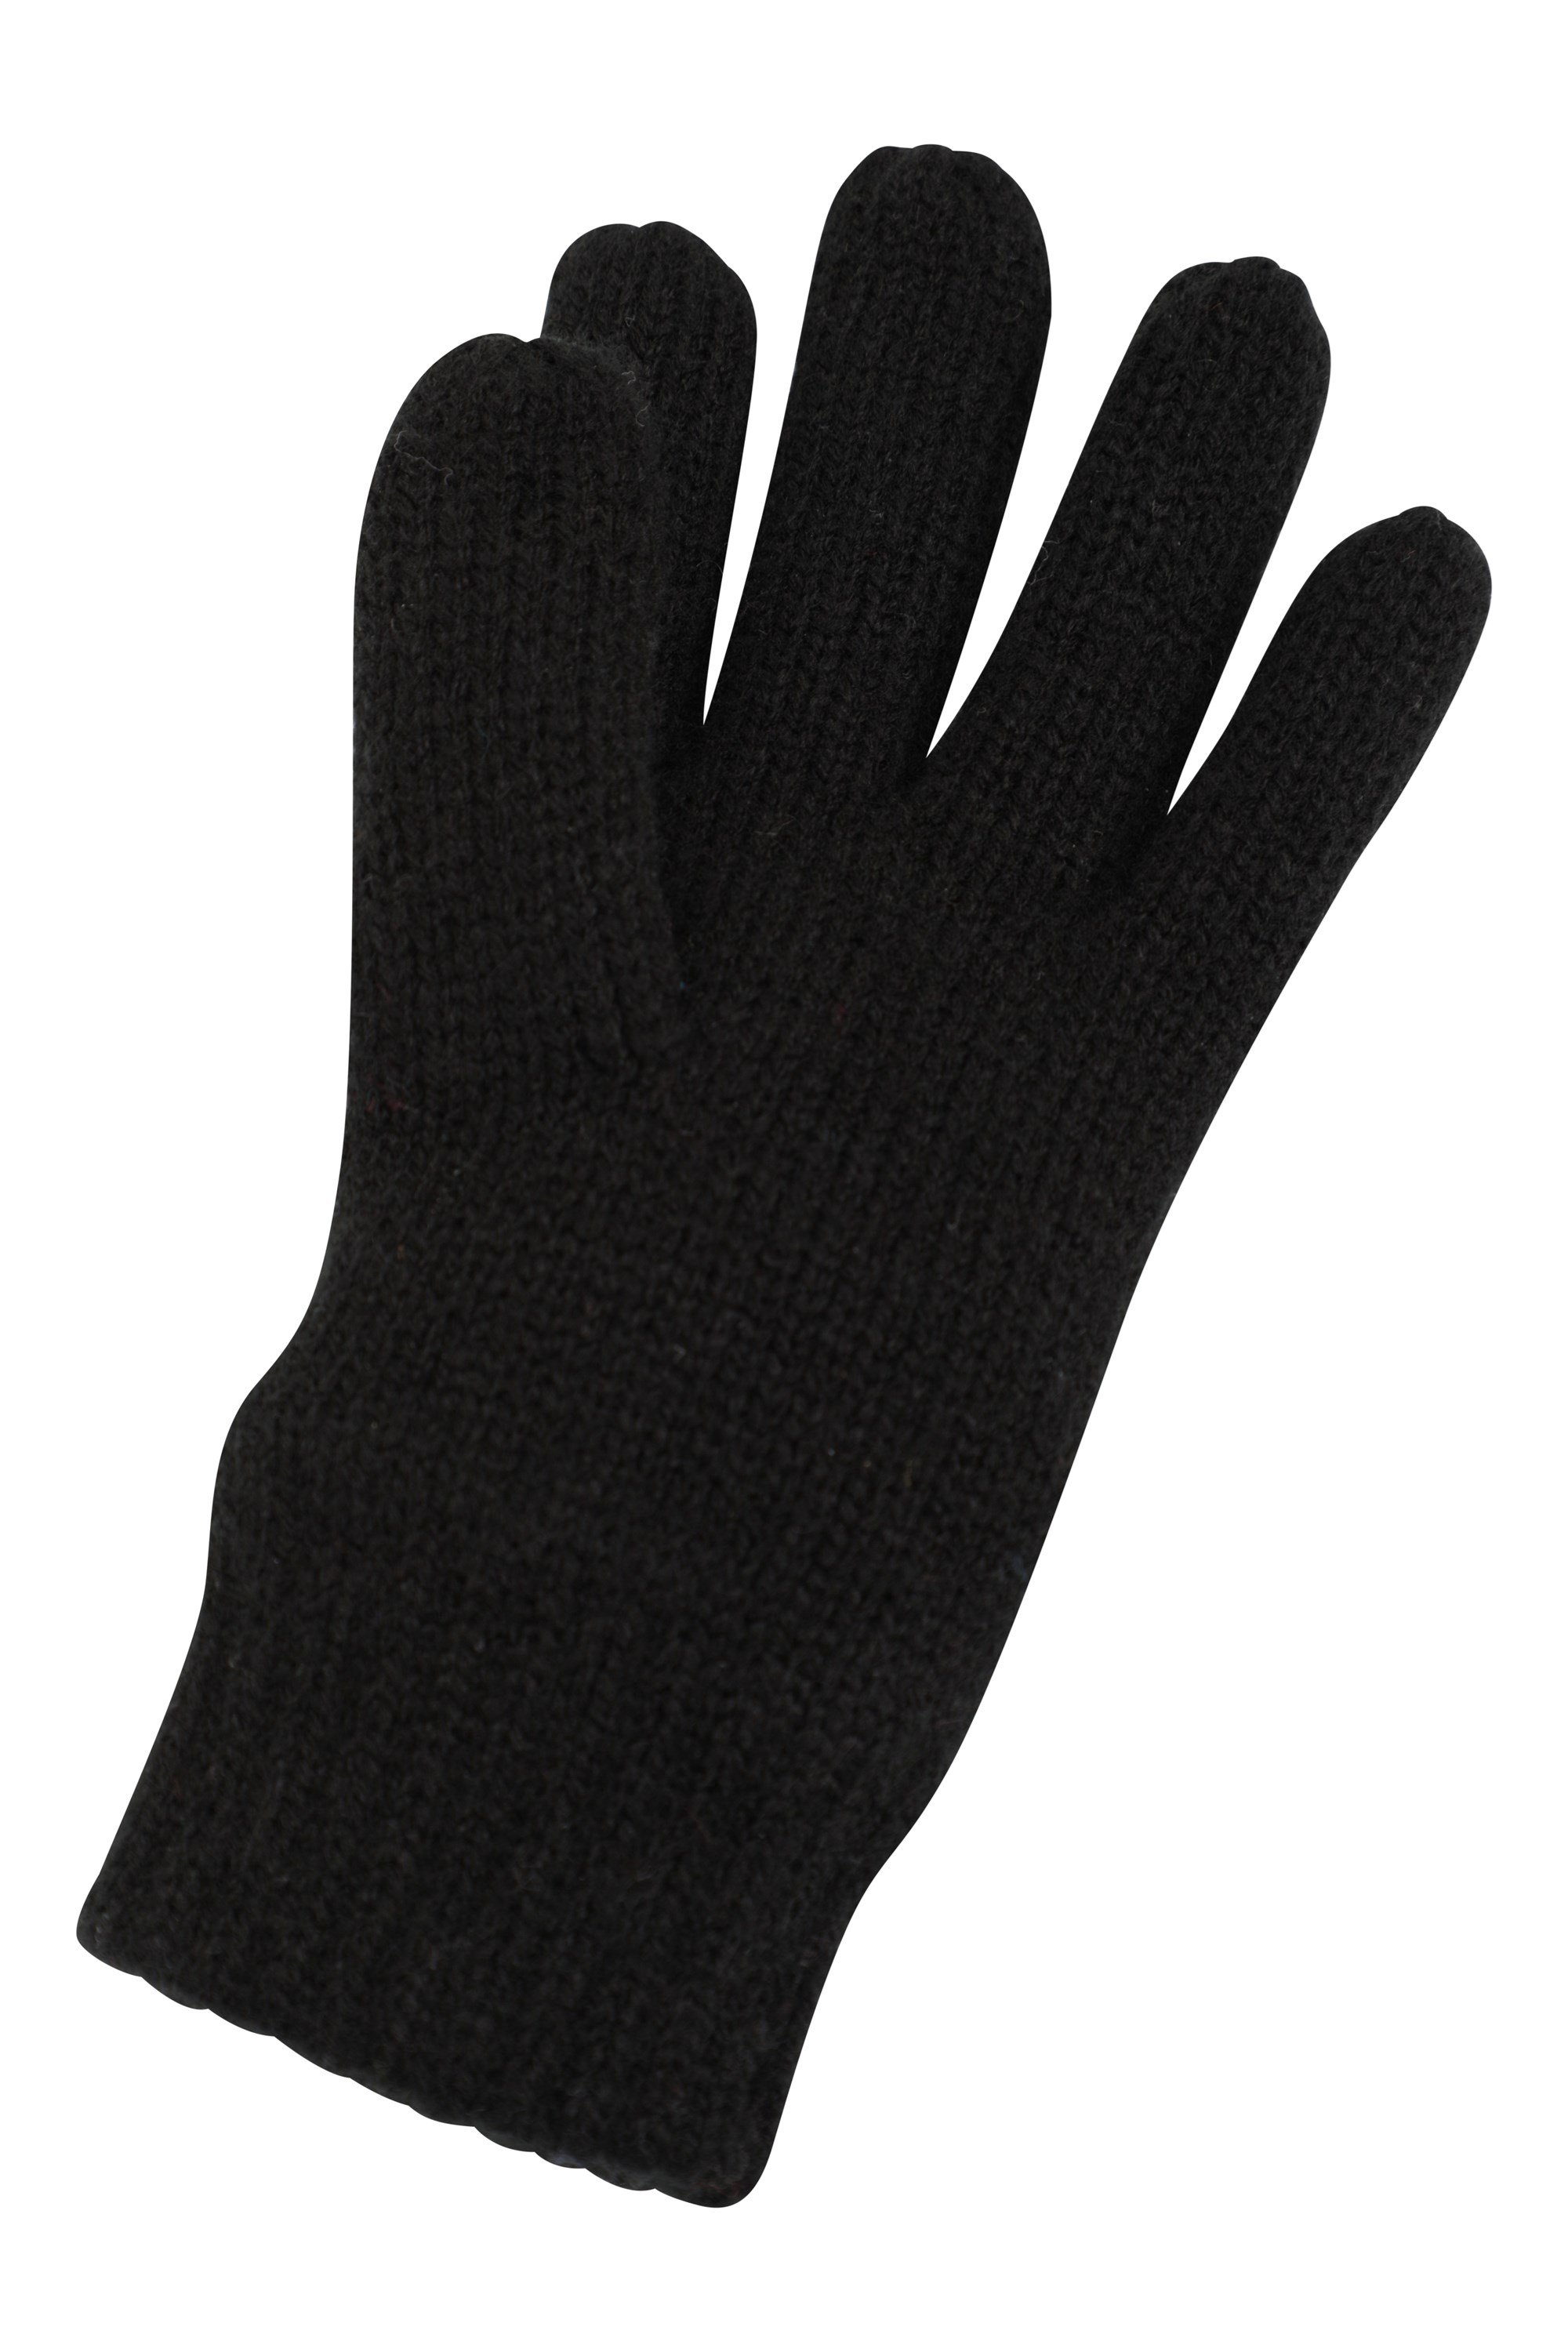 Kids Knitted Thinsulate Thermal Gloves | Mountain Warehouse US